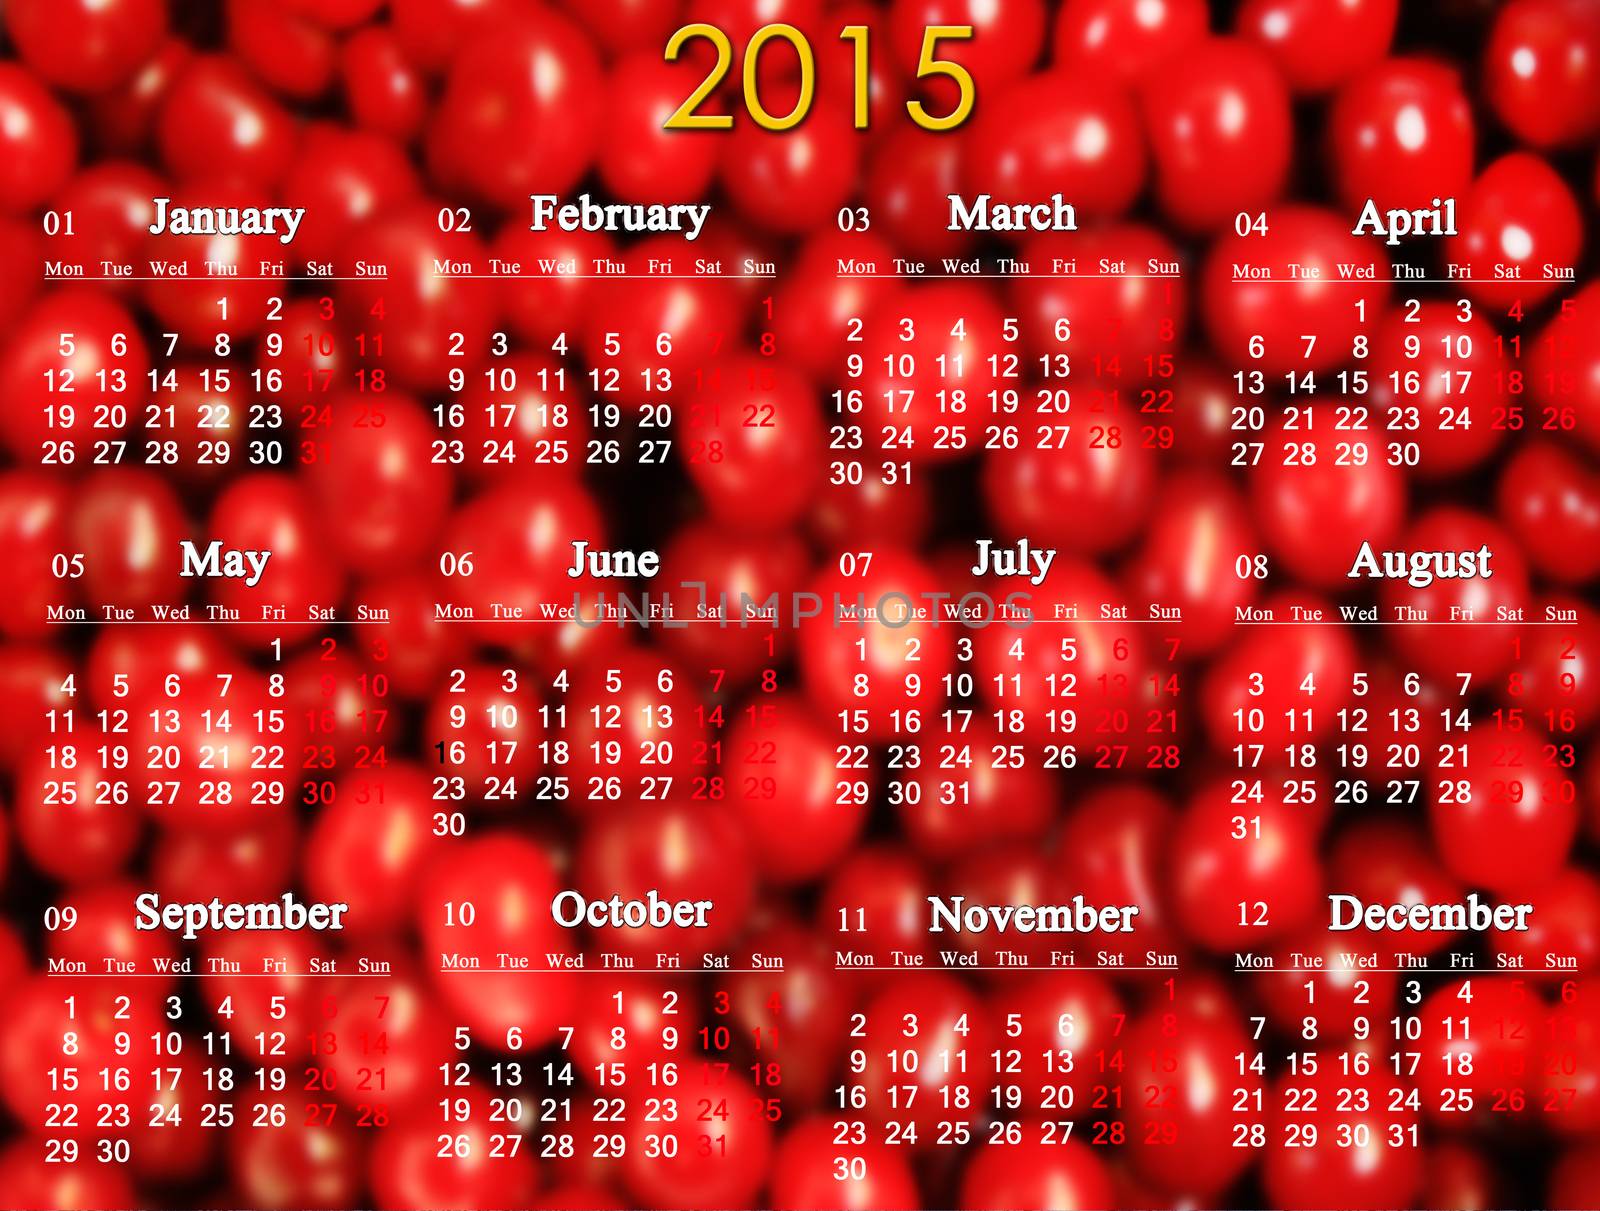 office calendar for 2015 year on the red cherry's background in English